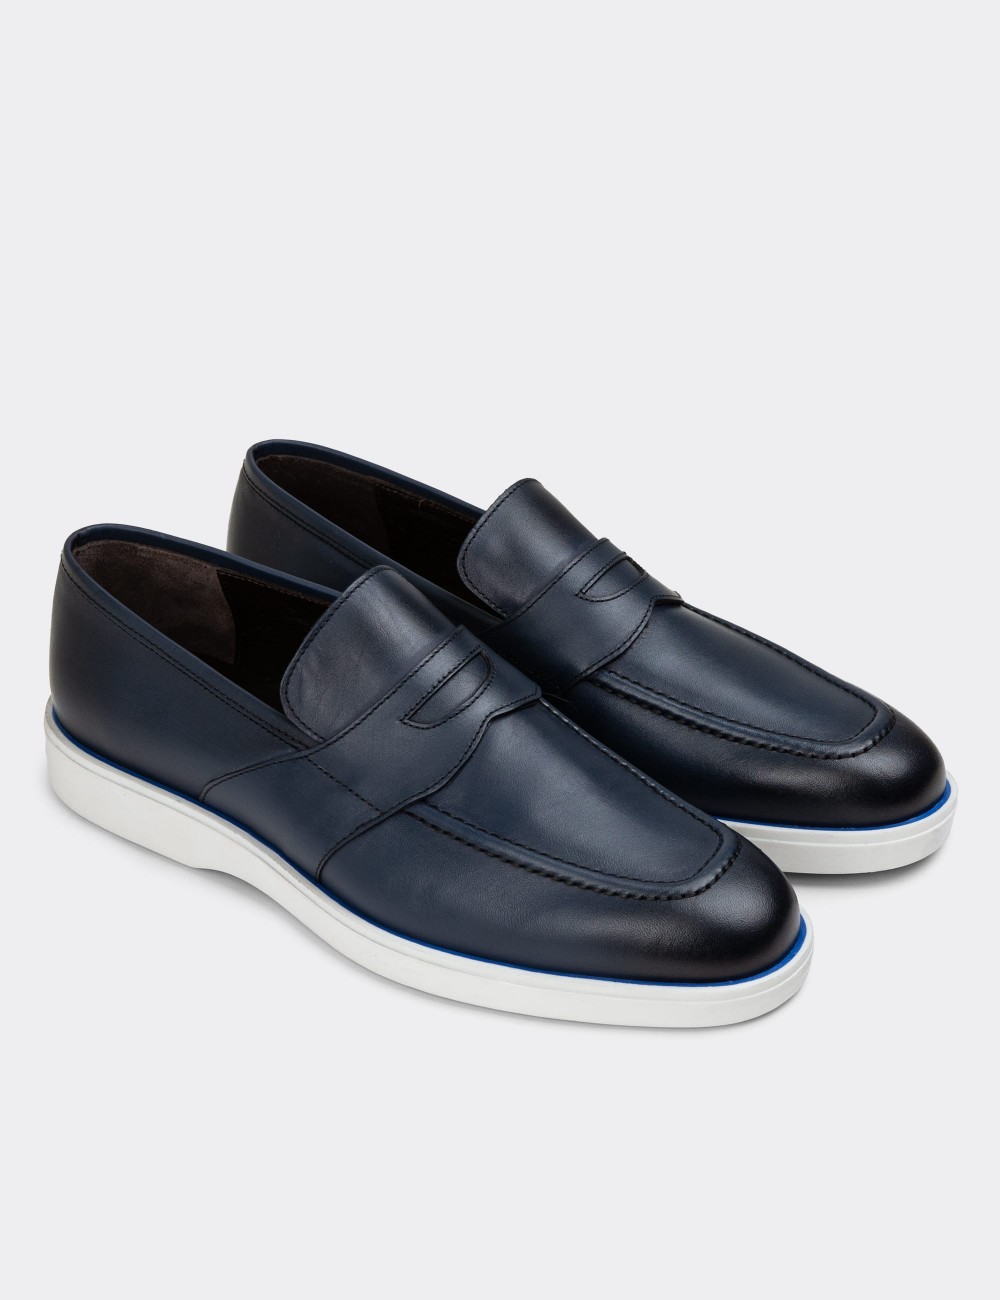 Blue Leather Loafers - 01960MMVIC01